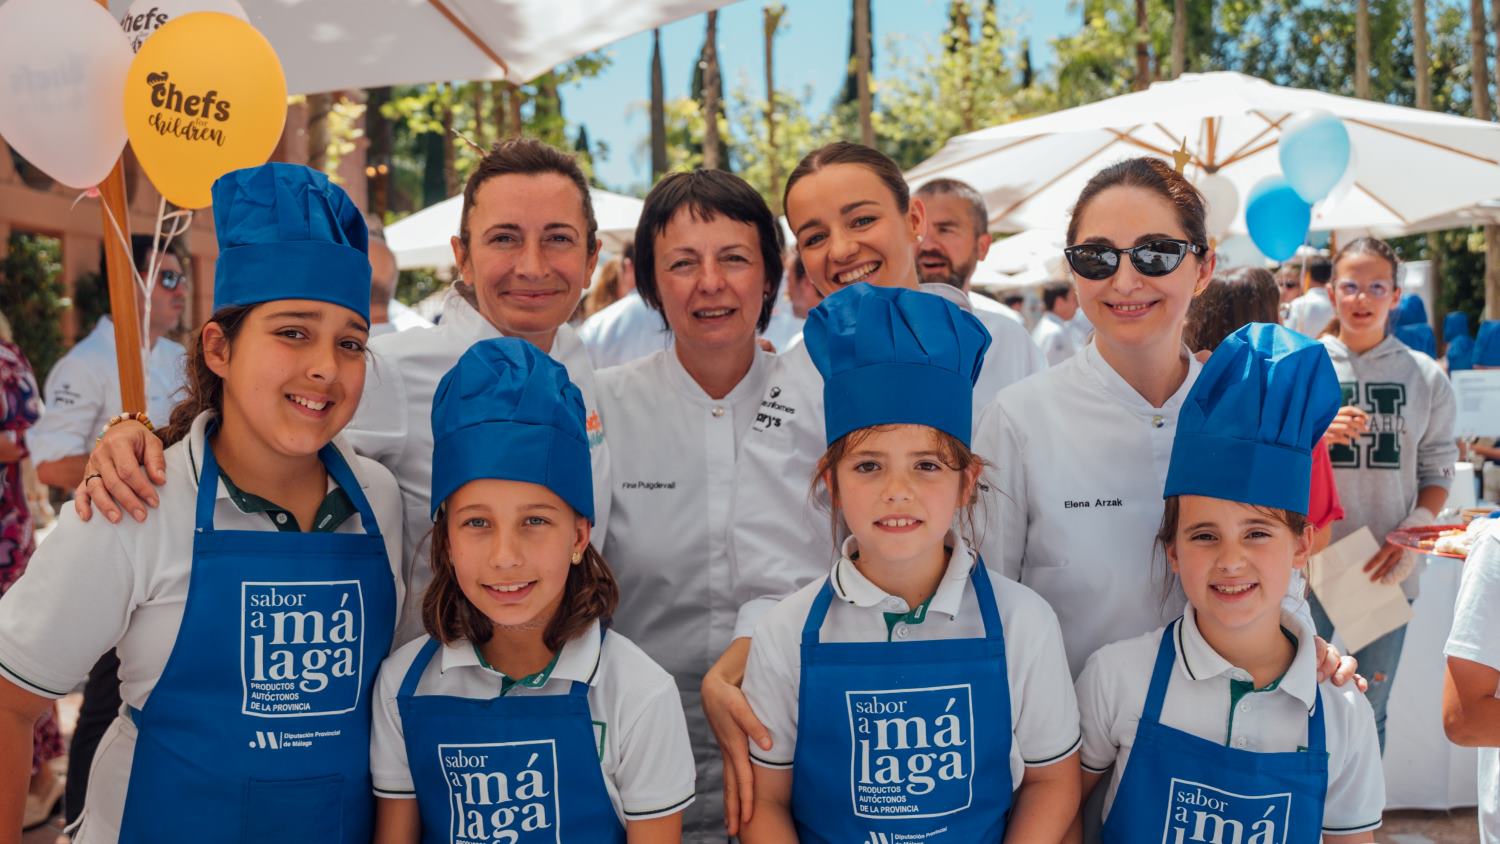 Le Cordon Bleu Madrid participates once again in the ChefsForChildren solidary initiative.